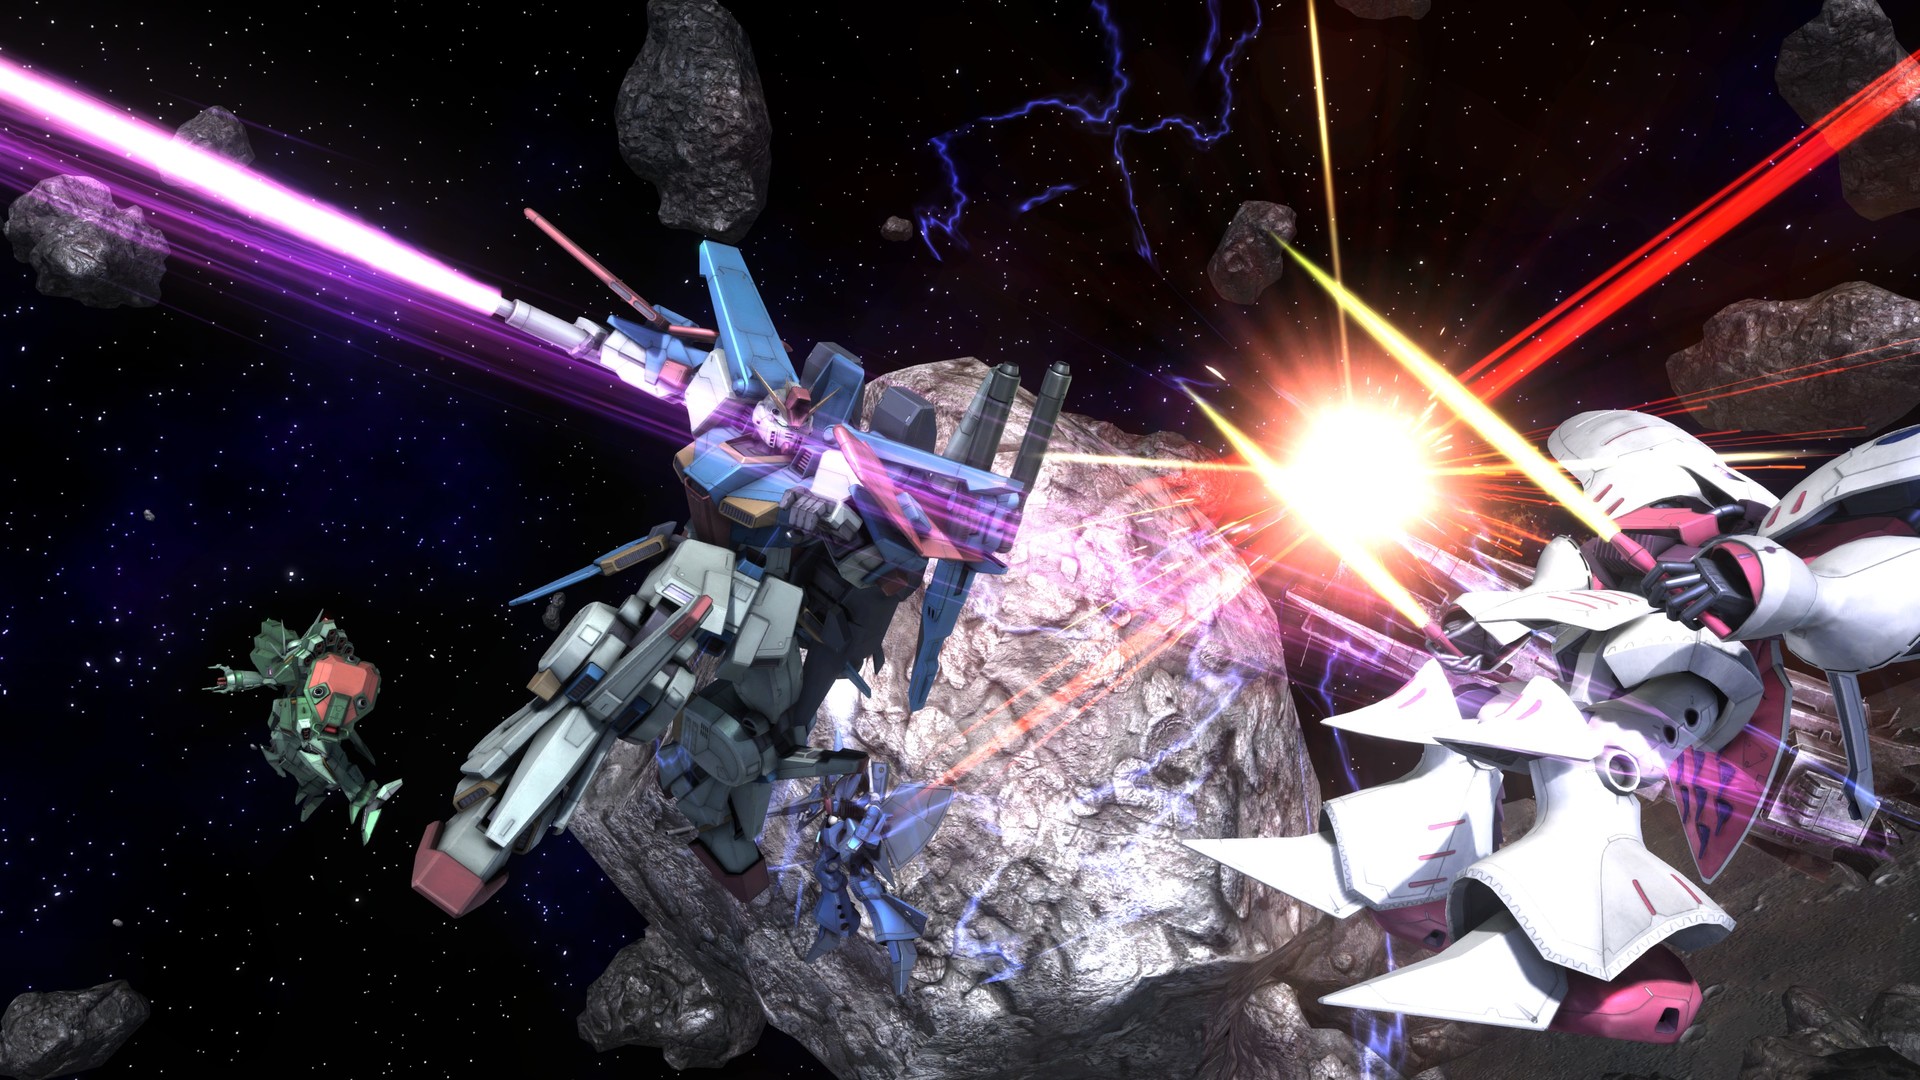 #
      Mobile Suit Gundam: Battle Operation 2 coming to PC “soon”